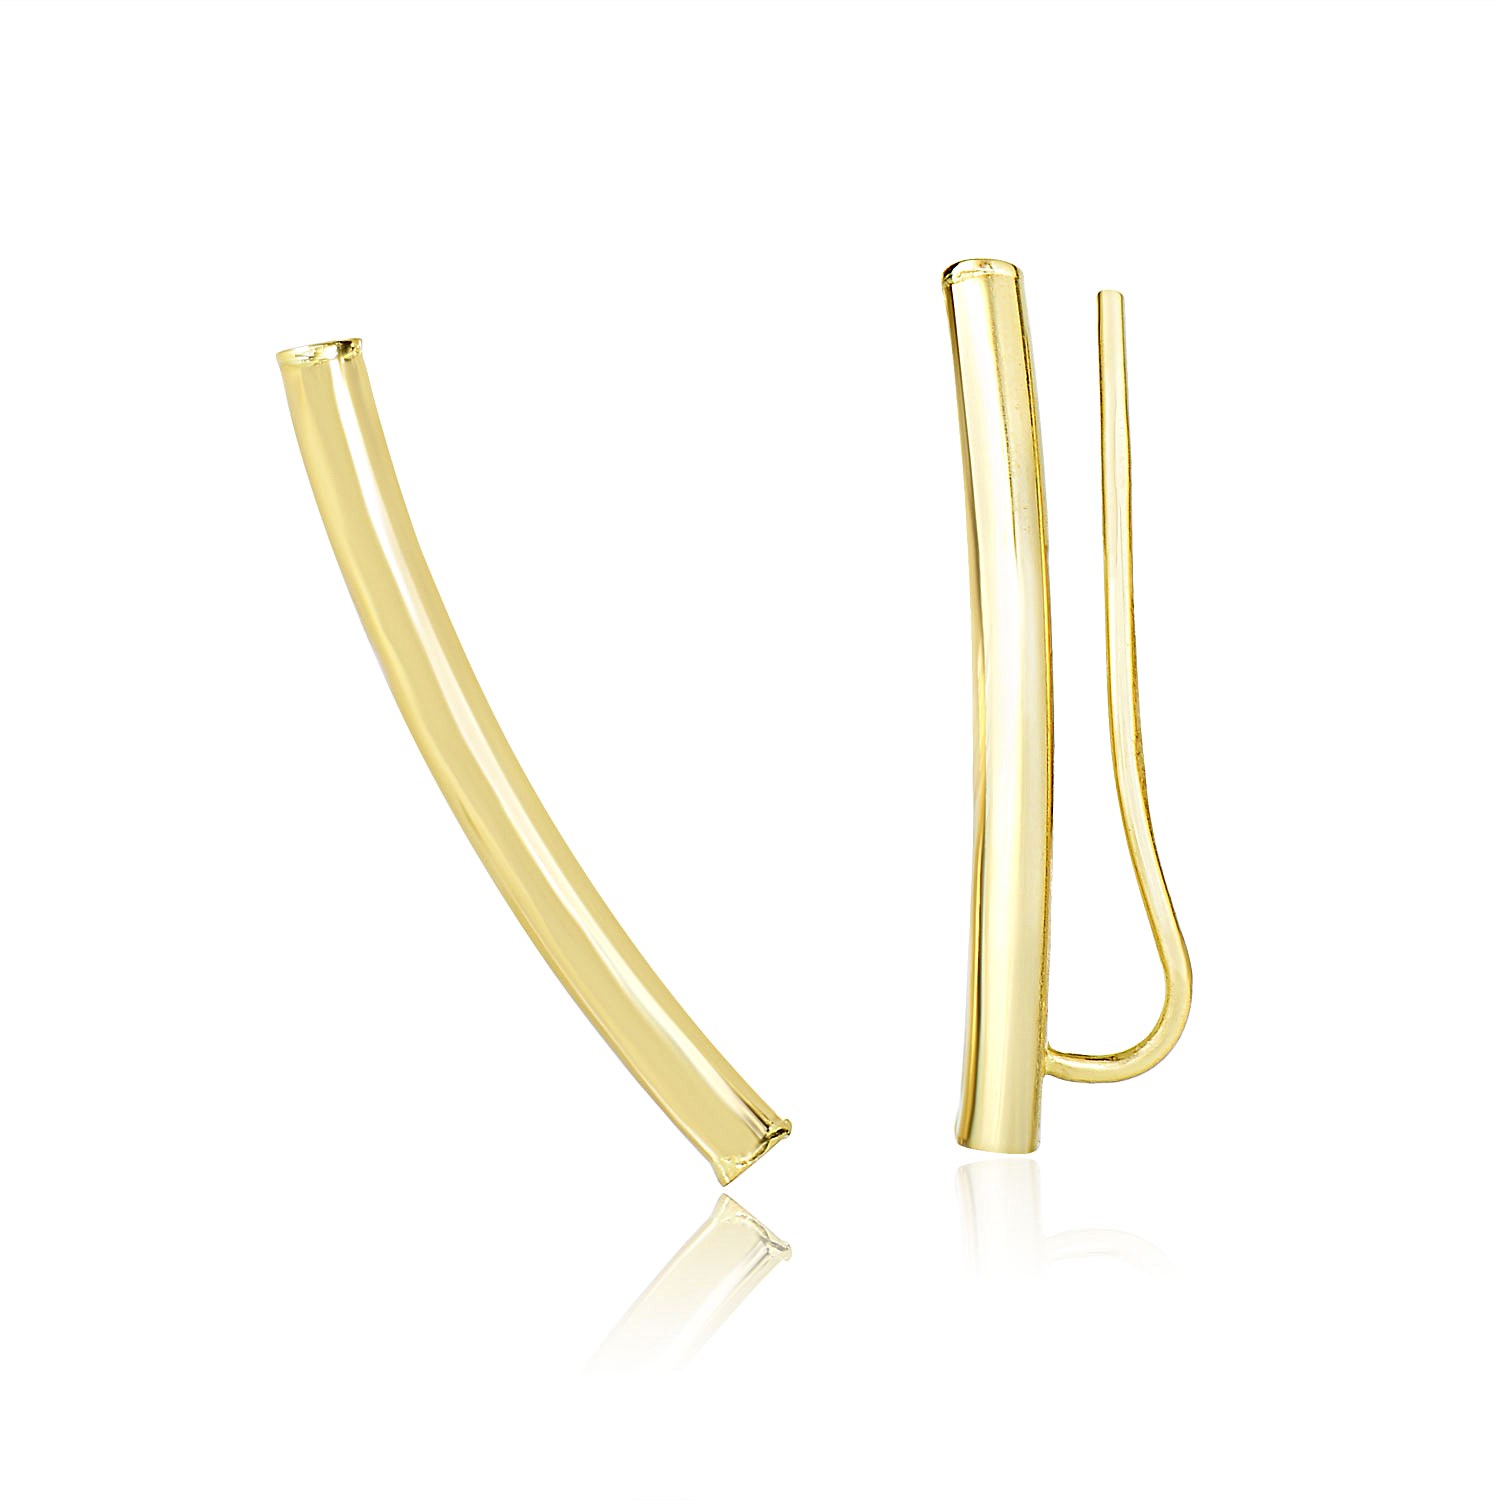 Shiny Curved Tube Earrings in 14k Yellow Gold - Richard Cannon Jewelry